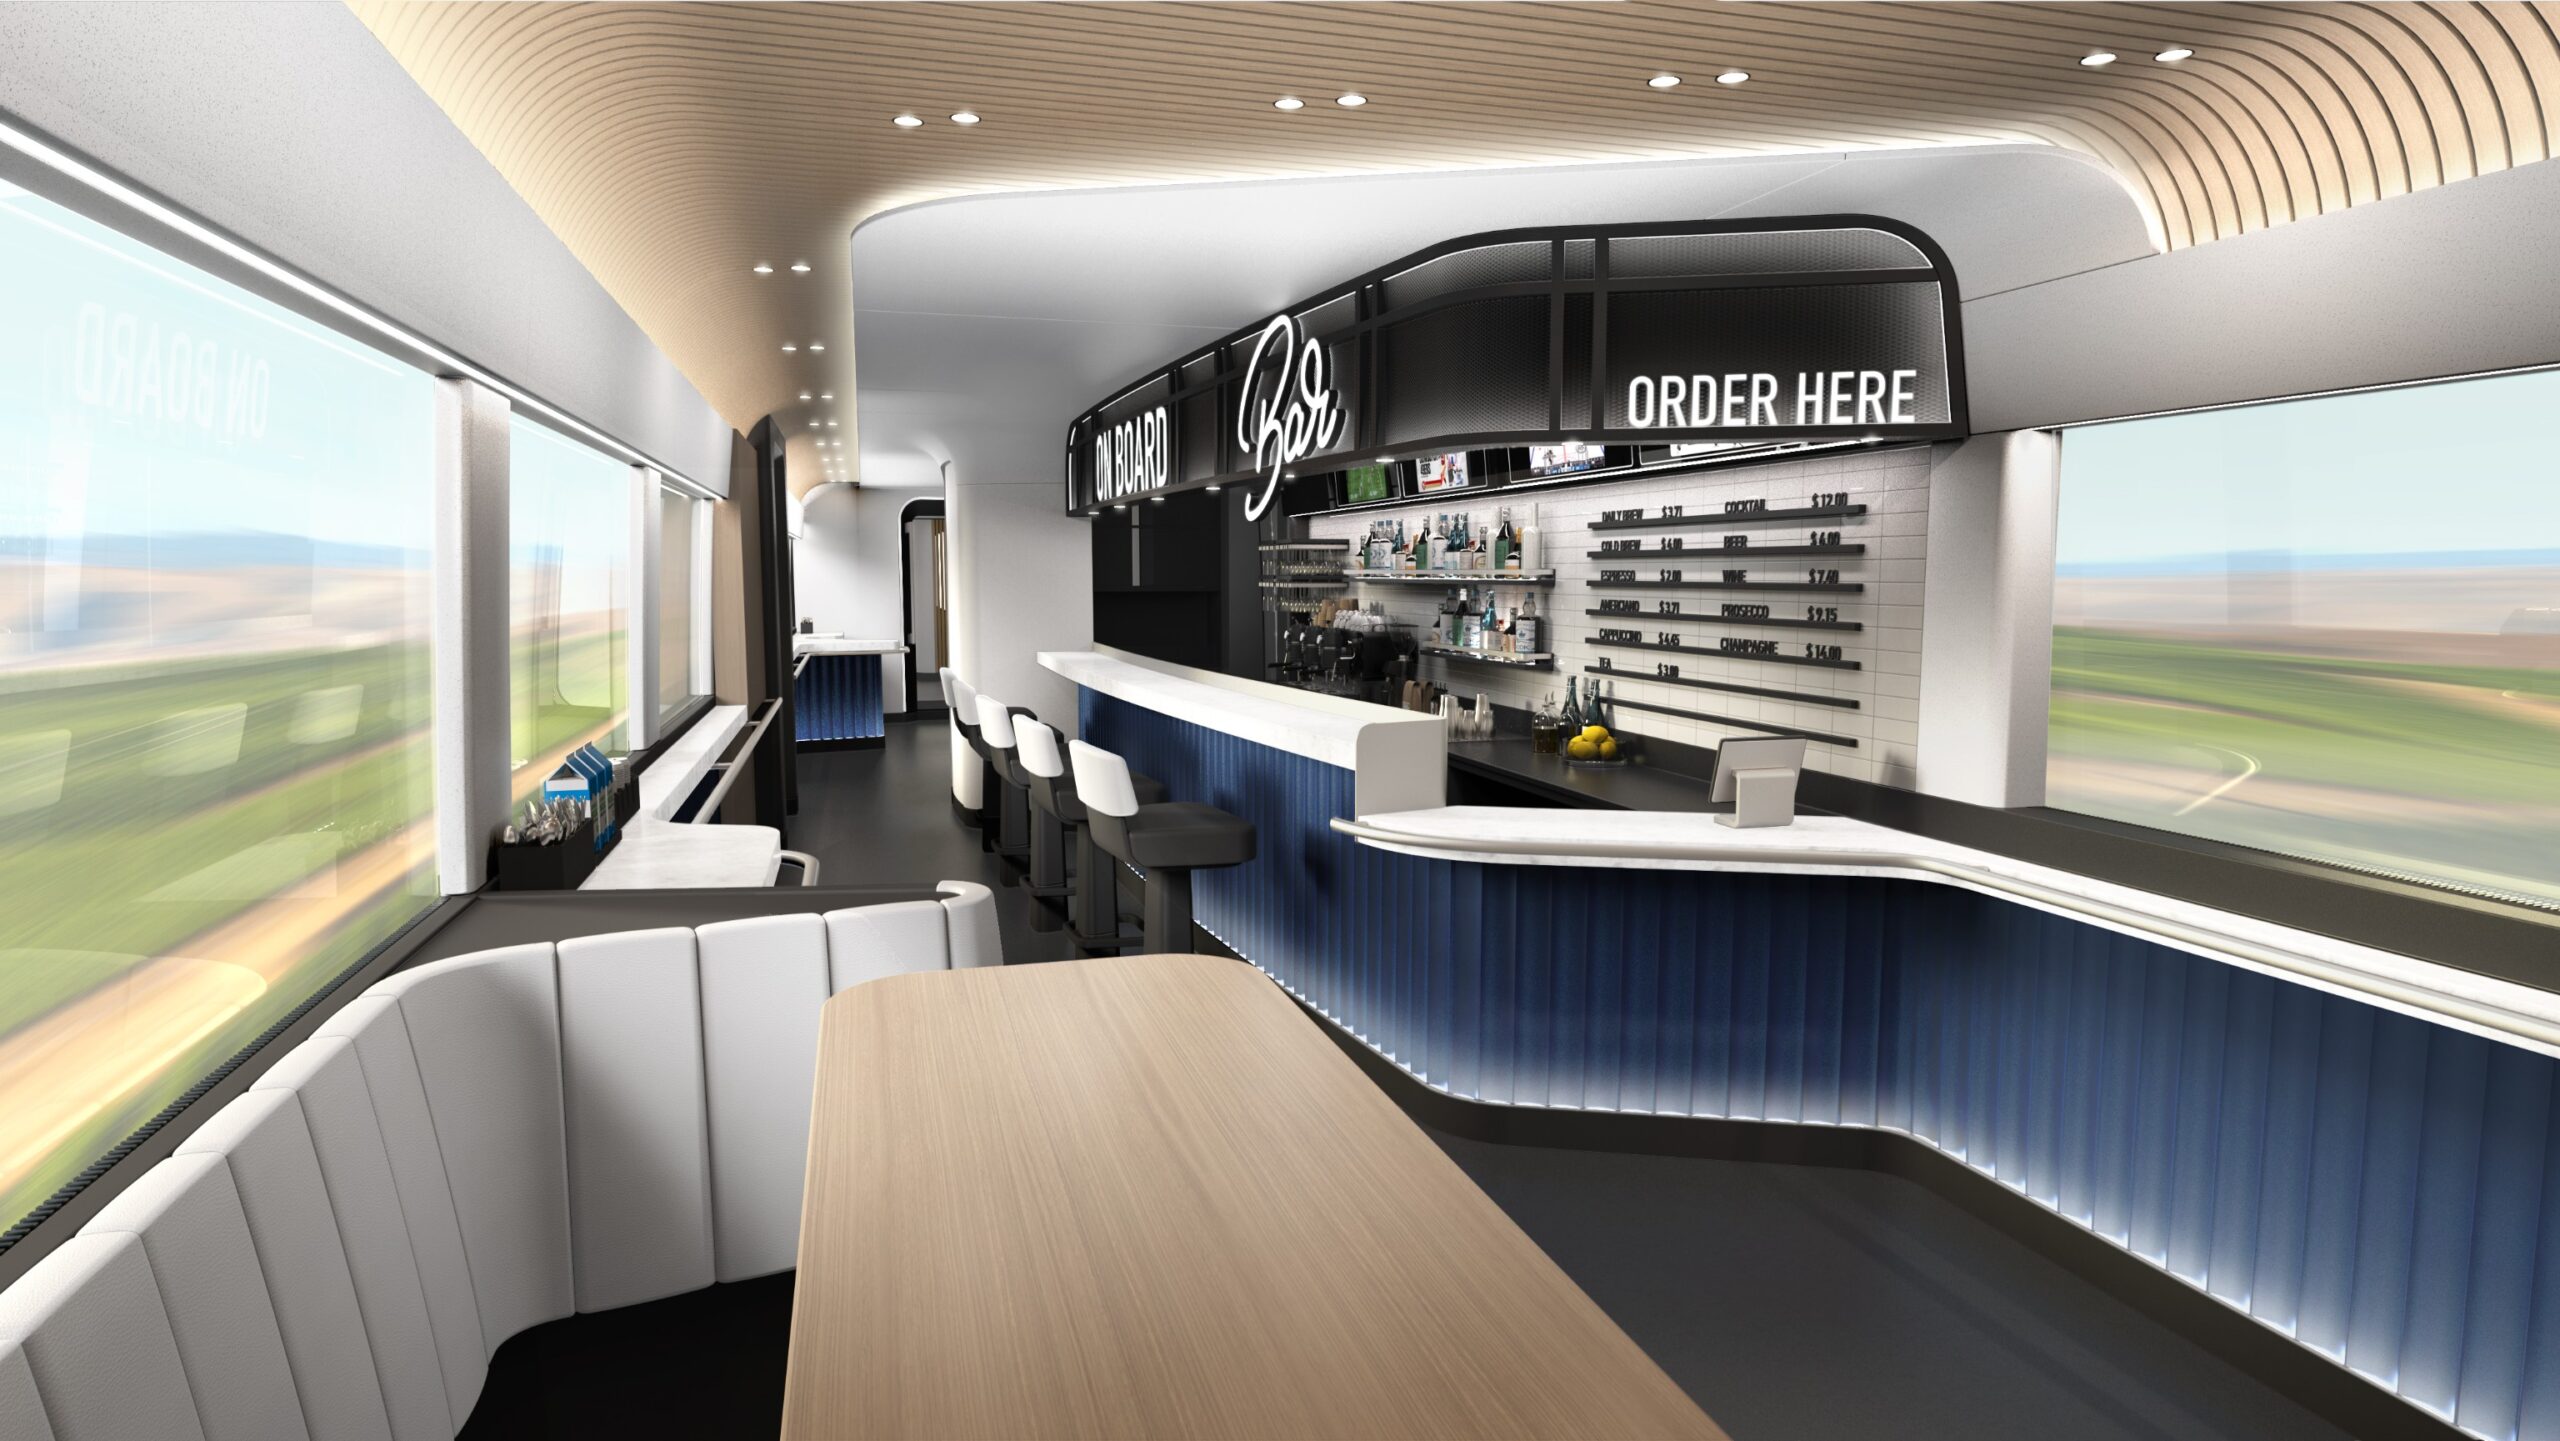 A rendering of the new food service area